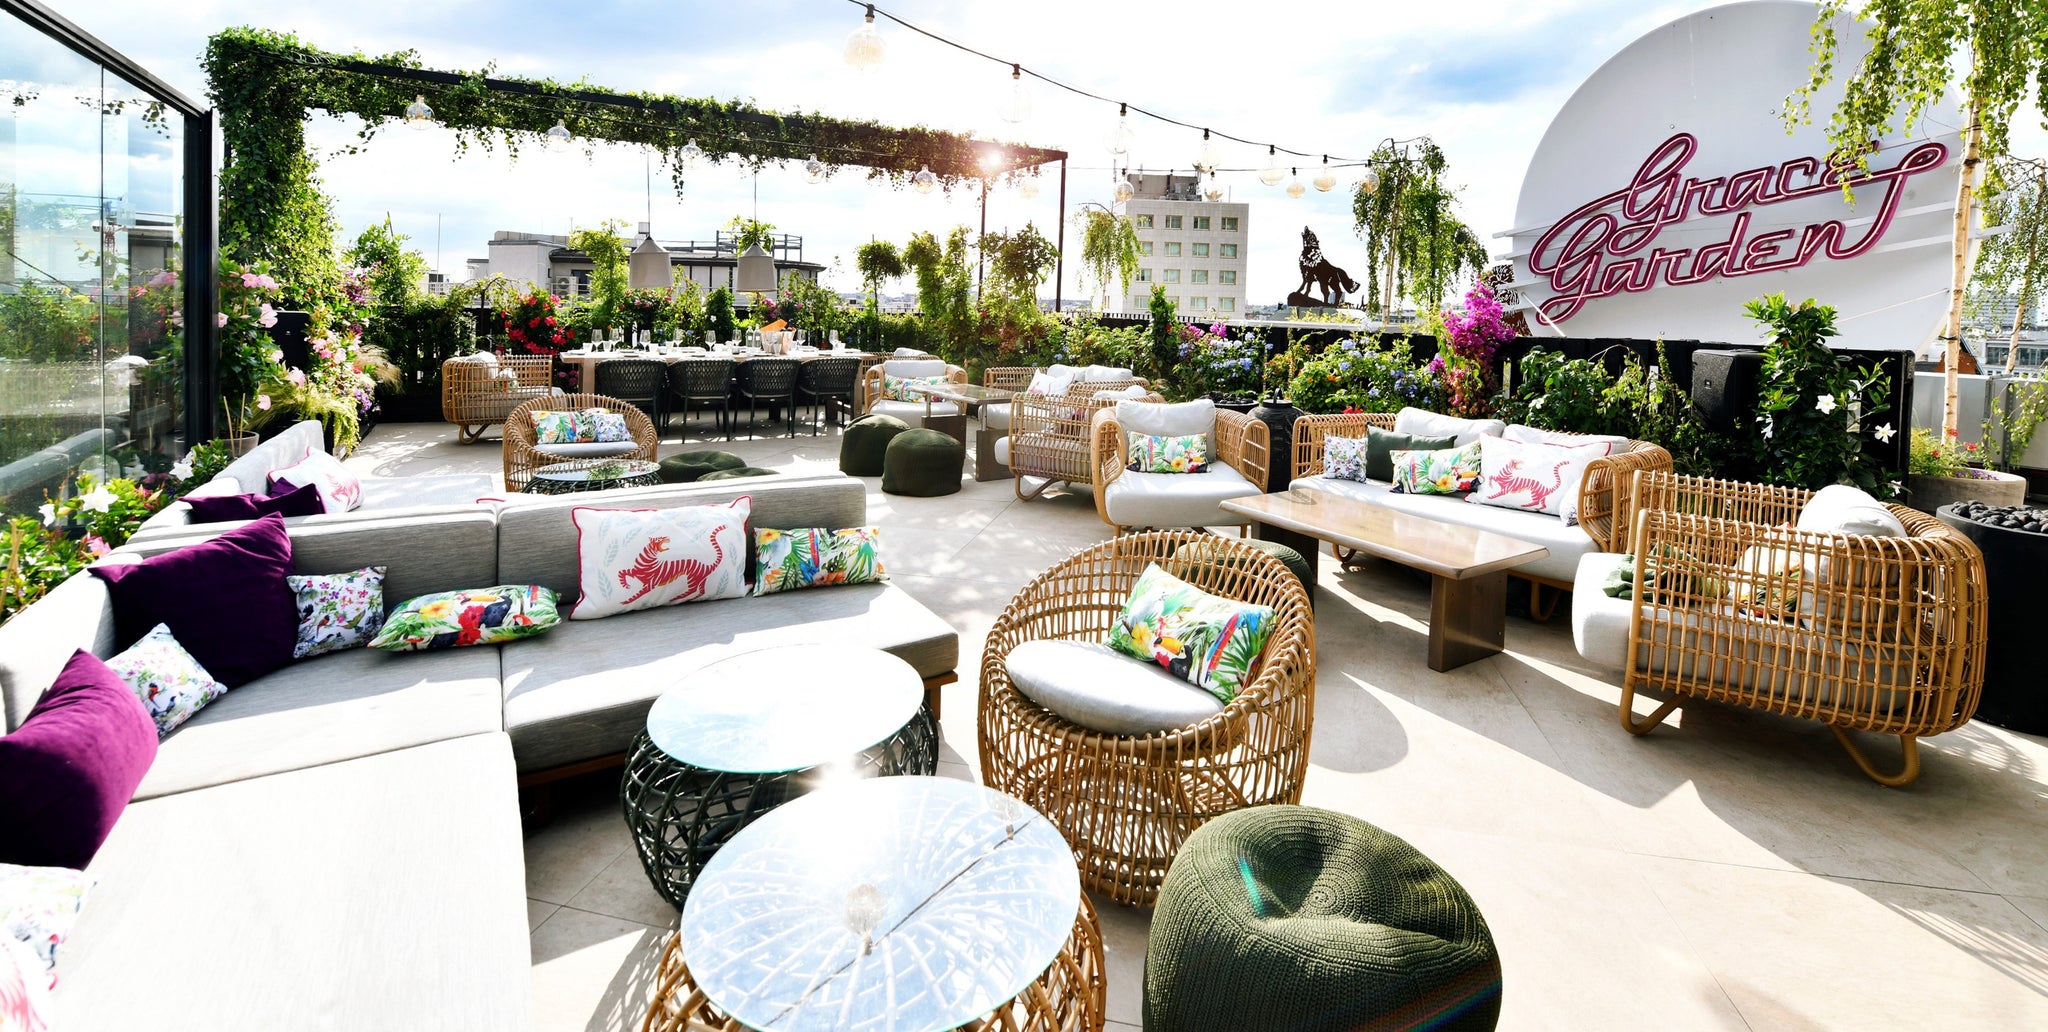 Grace Garden rooftop terrace atop Hotel Zoo Berlin, Cane-line Nest lounge furniture, green bushes, purple scatter cushions, pink neon sign with Garden Grace